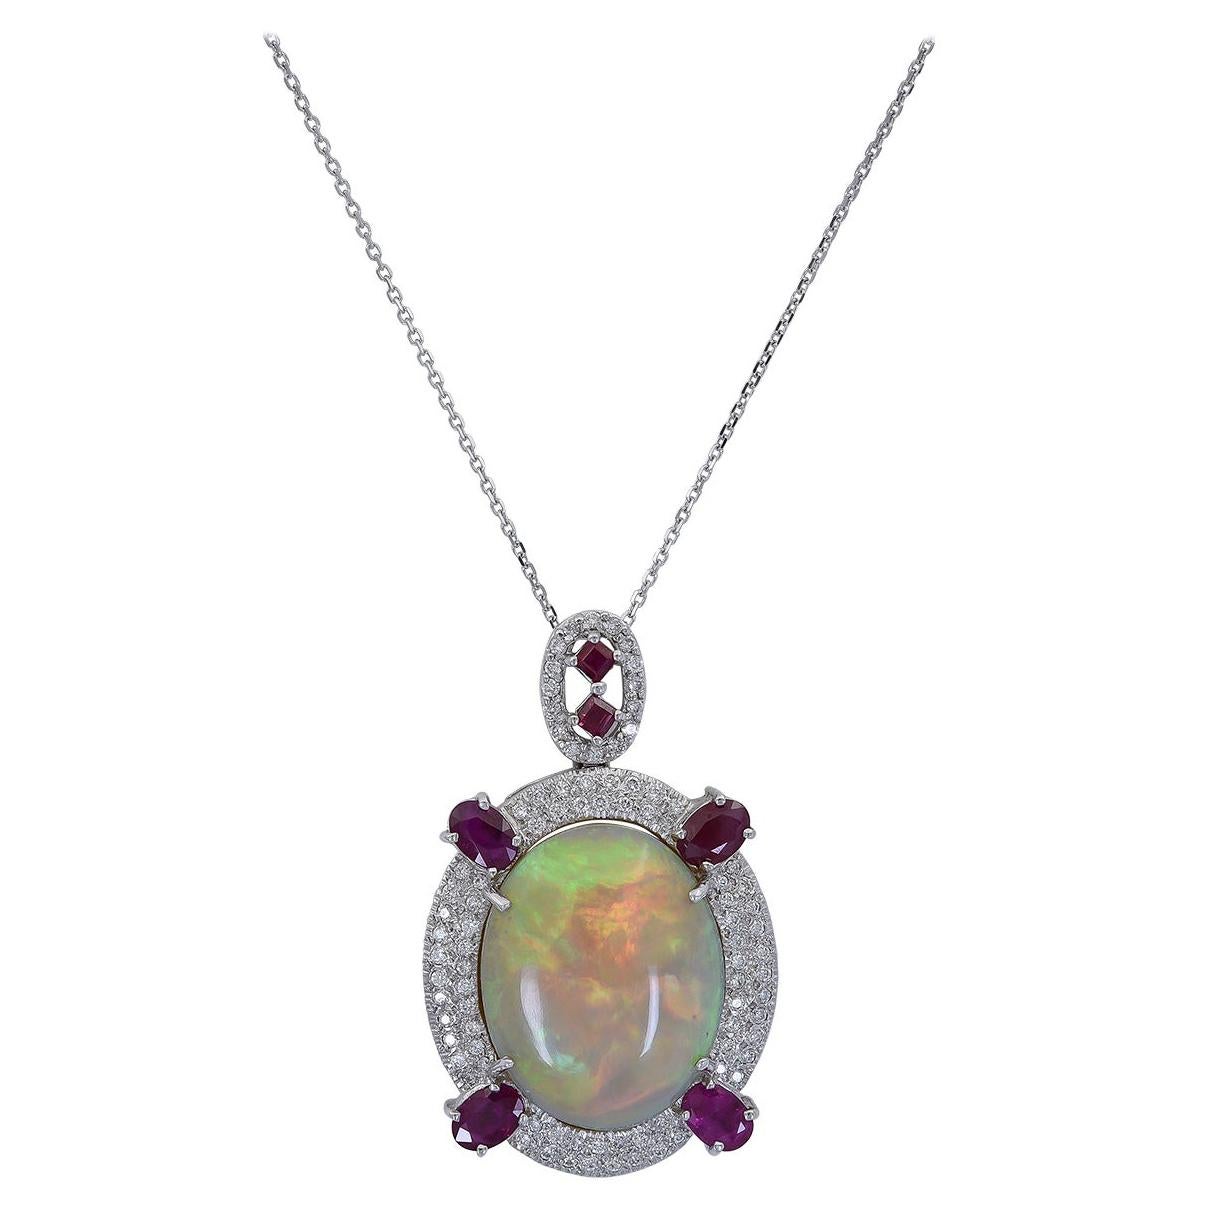 39.14 Carat Opal, Ruby, and Diamond Pendant Necklace